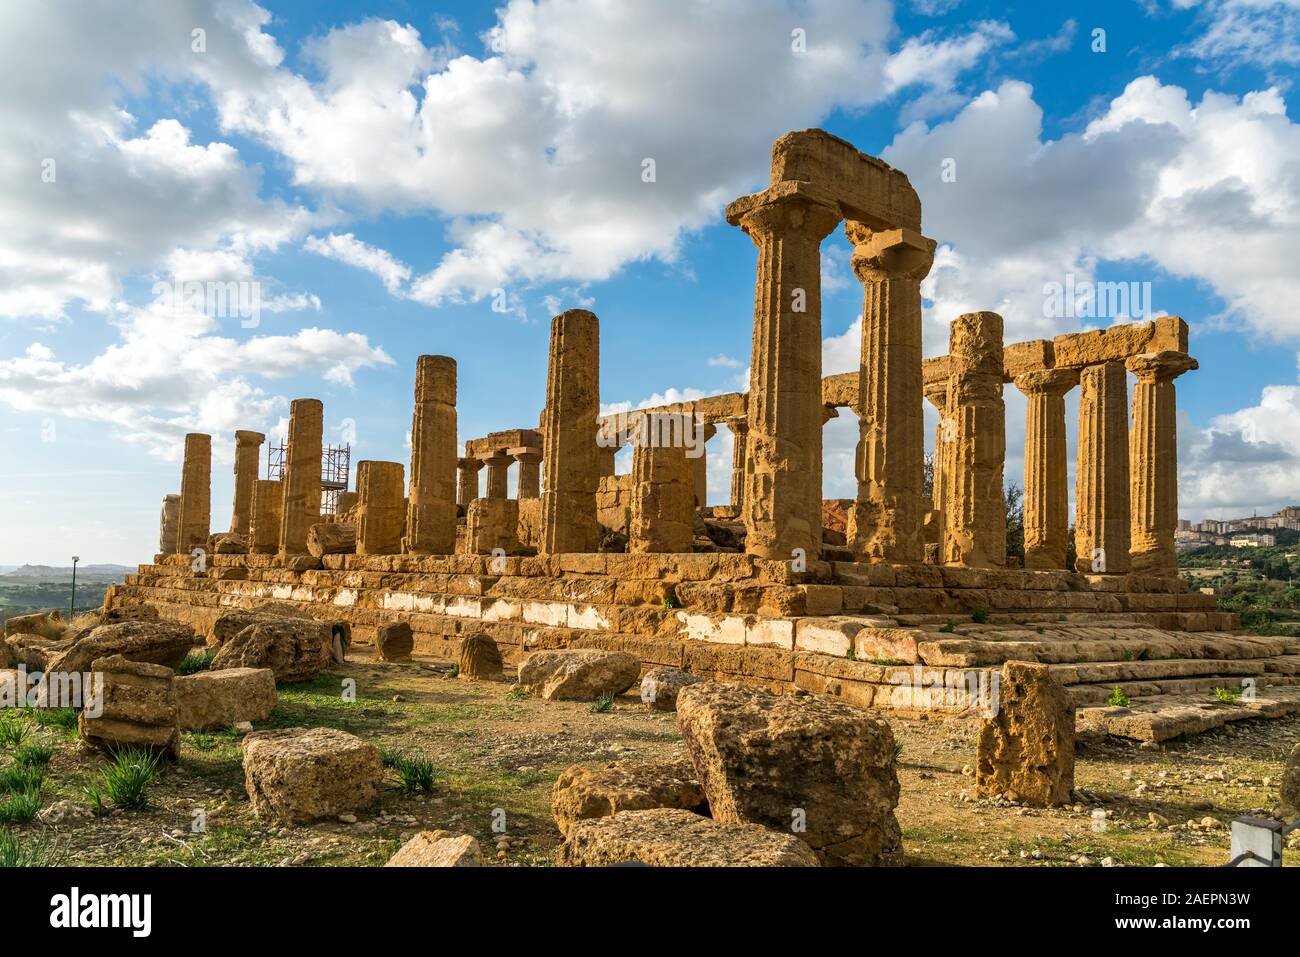 Heratempel im Tal der Tempel, Agrigent, Sizilien, Italien, Europa  |  Temple of Juno, Valley of the Temples, Agrigento, Sicily, Italy, Europe Stock Photo